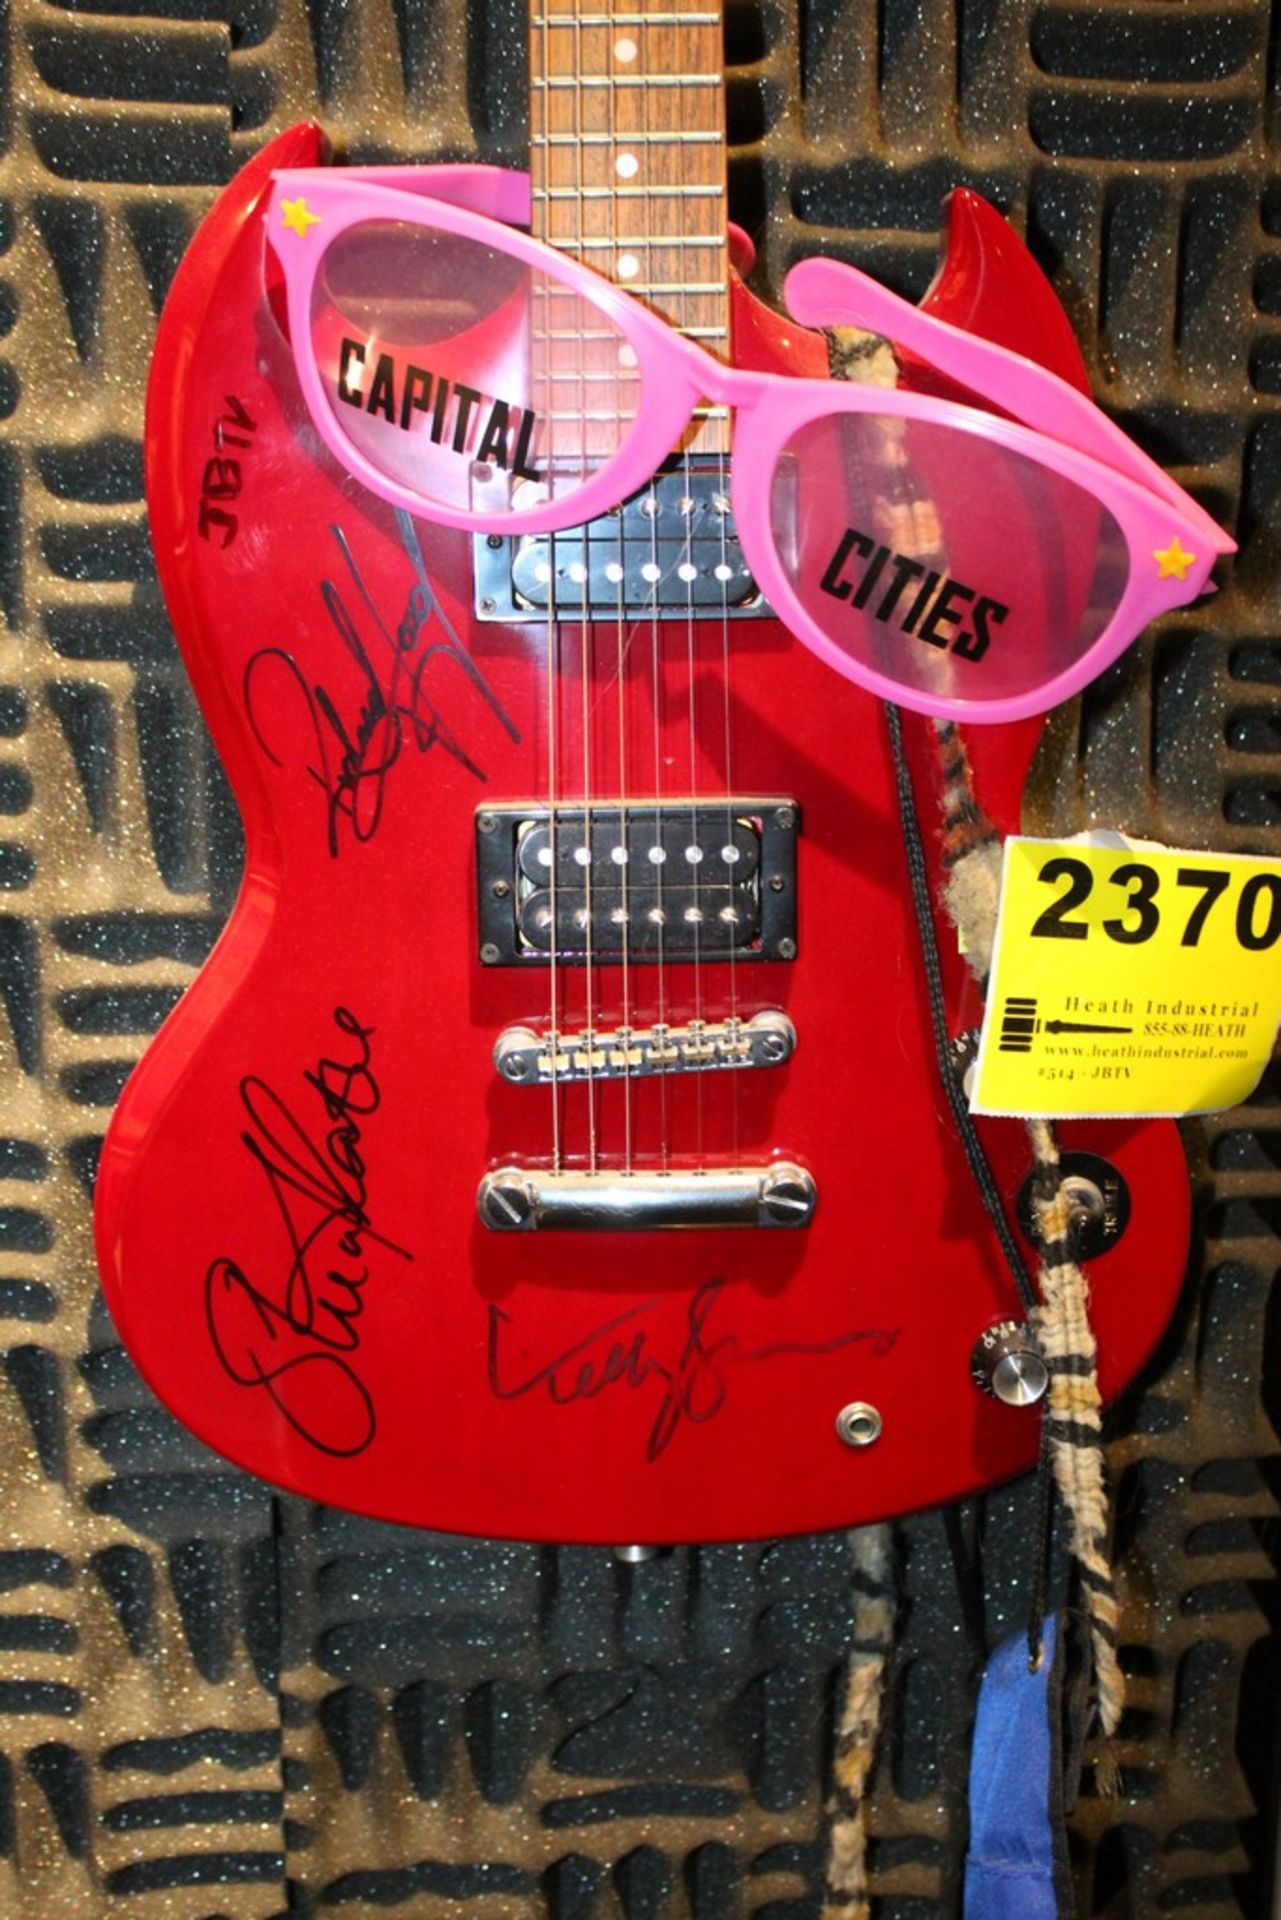 Signed Red Epiphone Guitar - Image 2 of 2